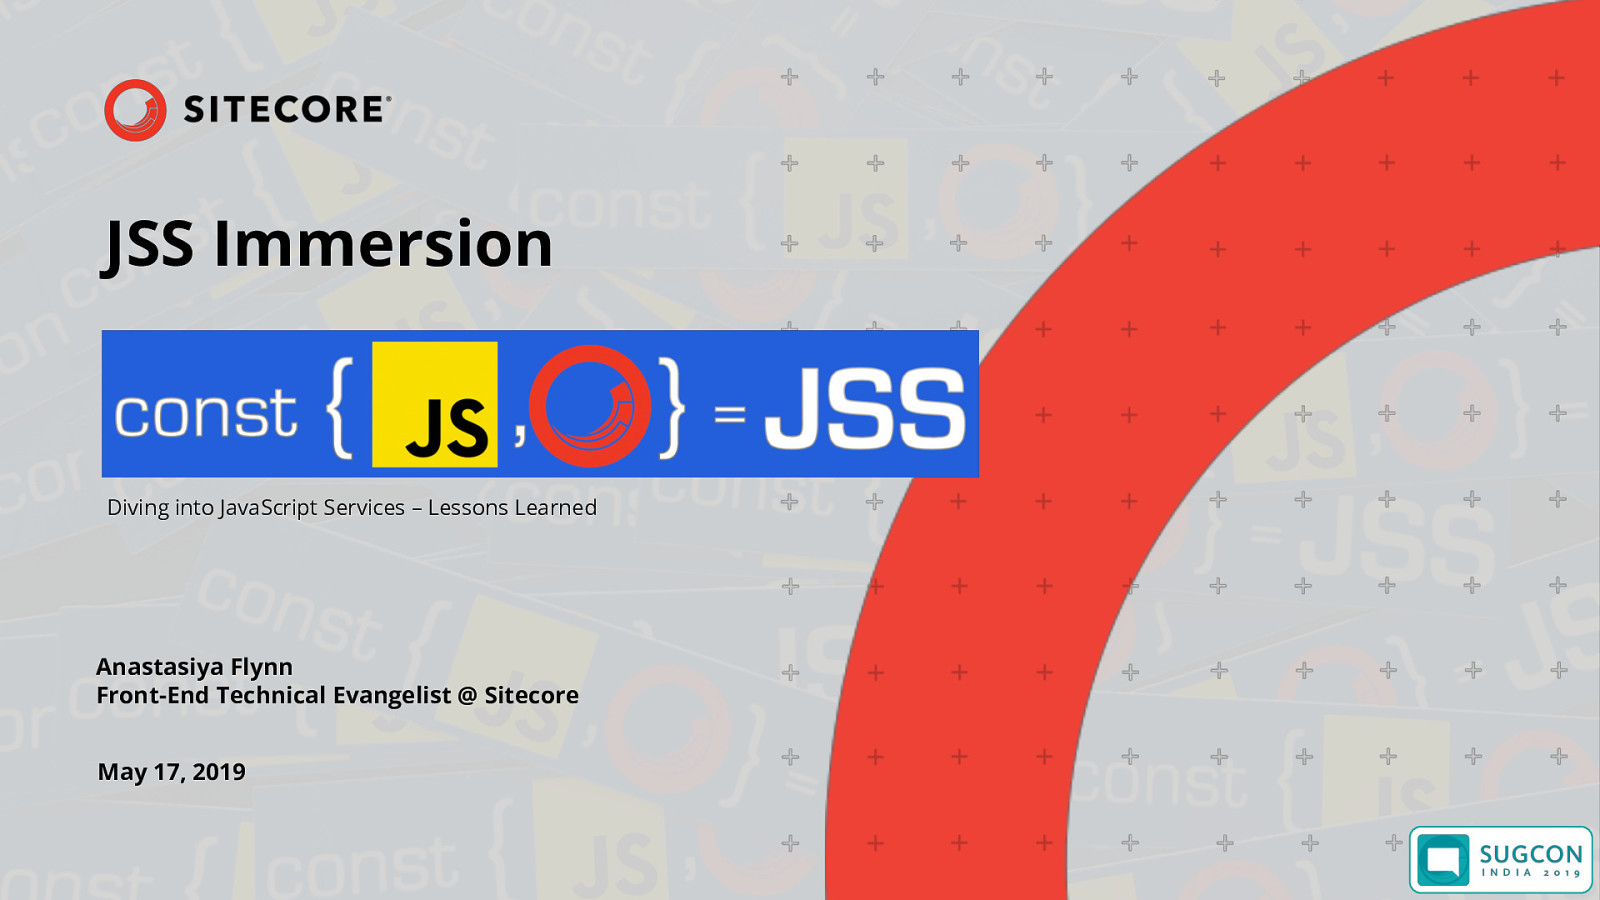 Sitecore JavaScript Services Immersion - Lessons Learned